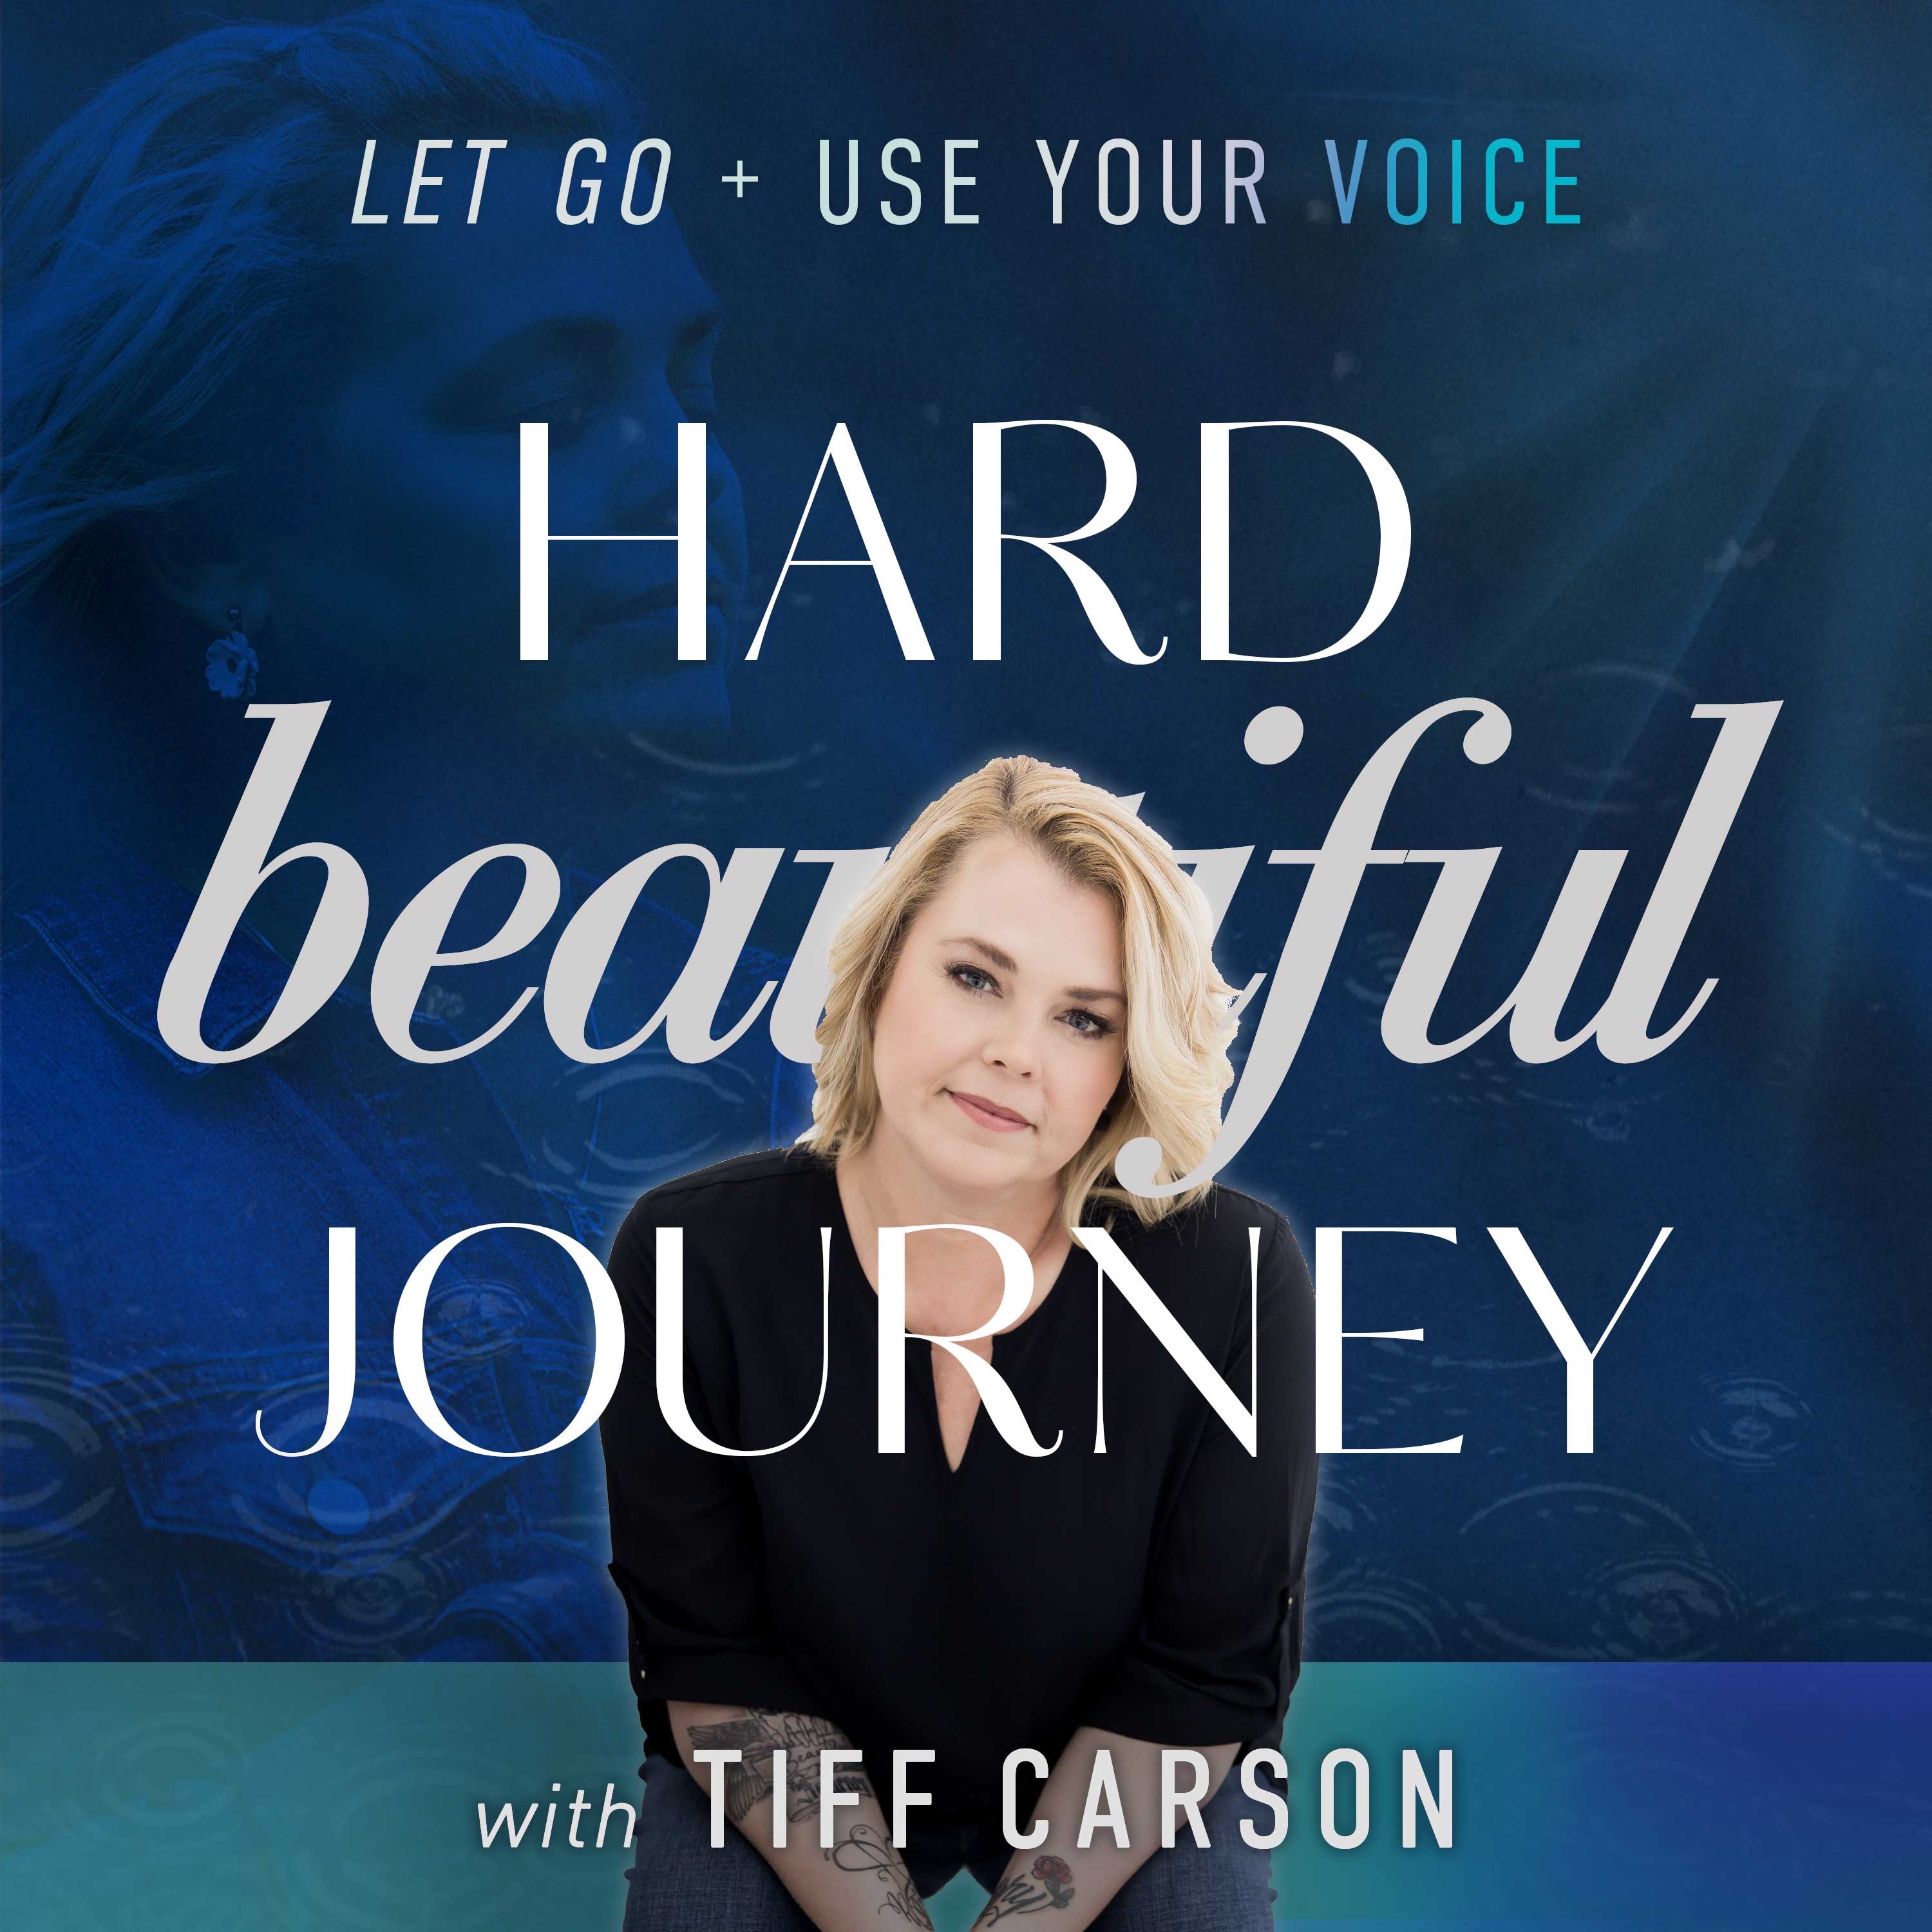 Hard Beautiful Journey - Vulnerable Conversations about Grief, Trauma, Addictions and Mental Health podcast show image